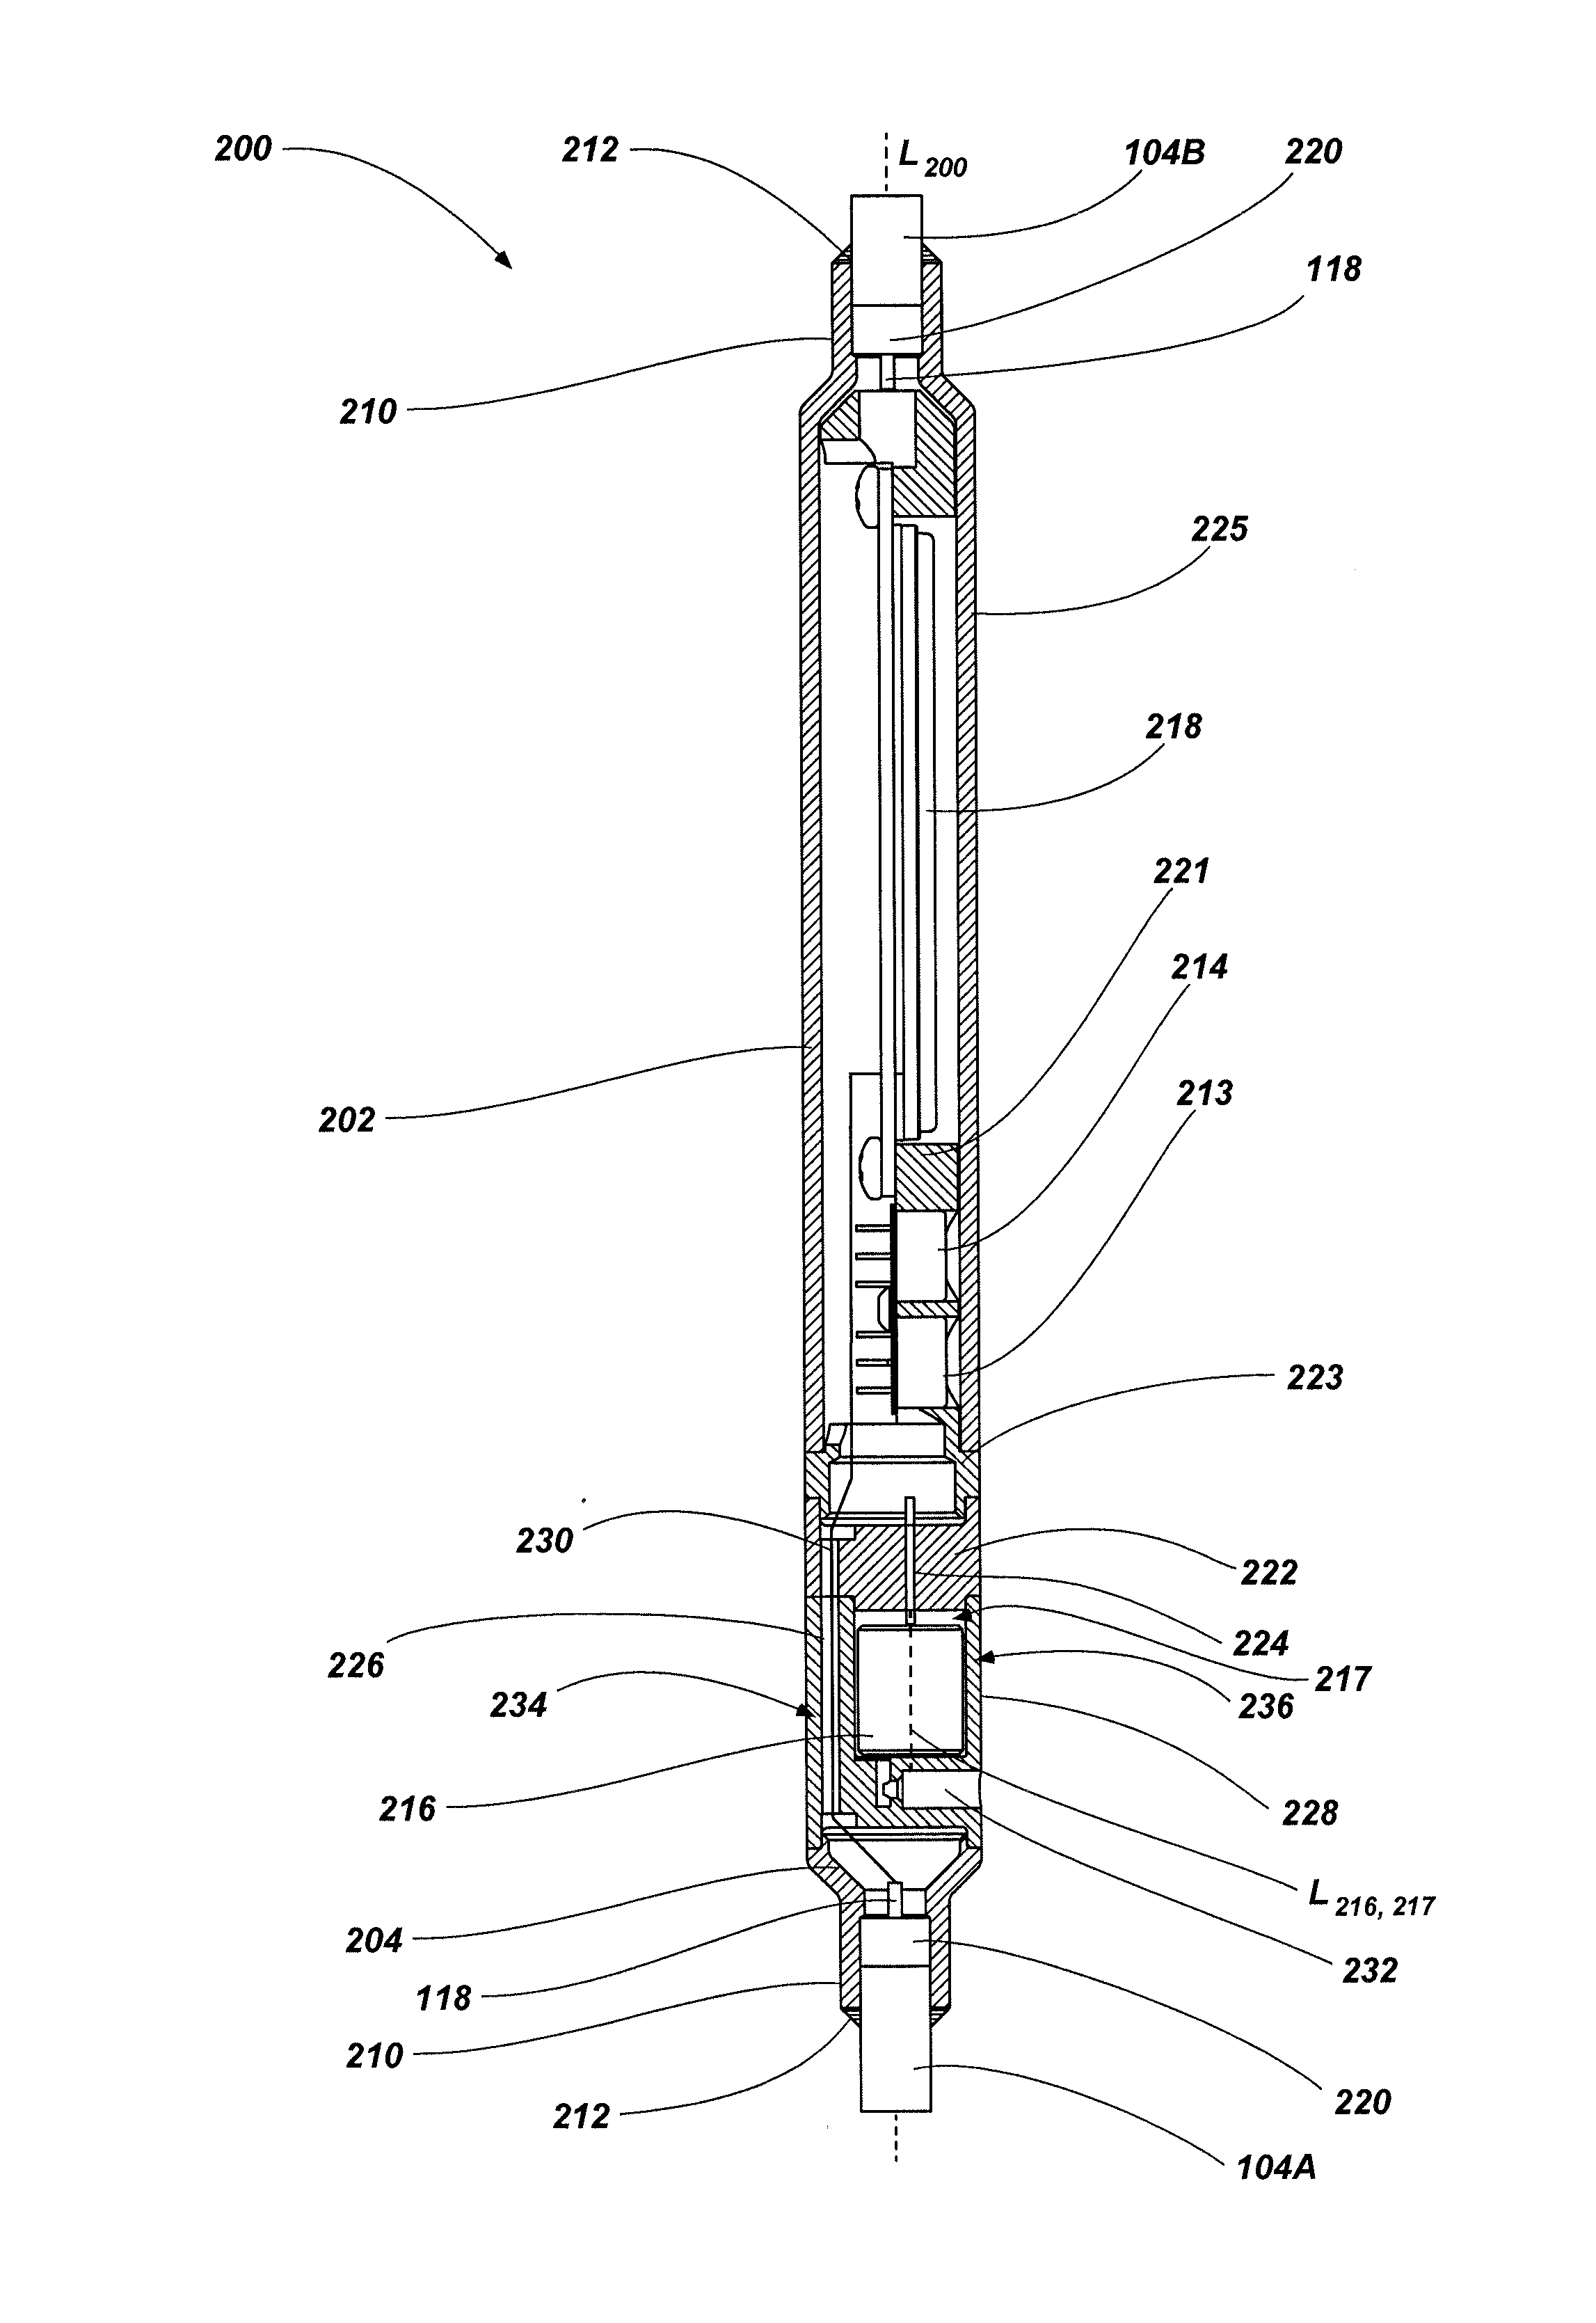 Downhole distributed pressure sensor arrays, downhole pressure sensors, downhole distributed pressure sensor arrays including quartz resonator sensors, and related methods